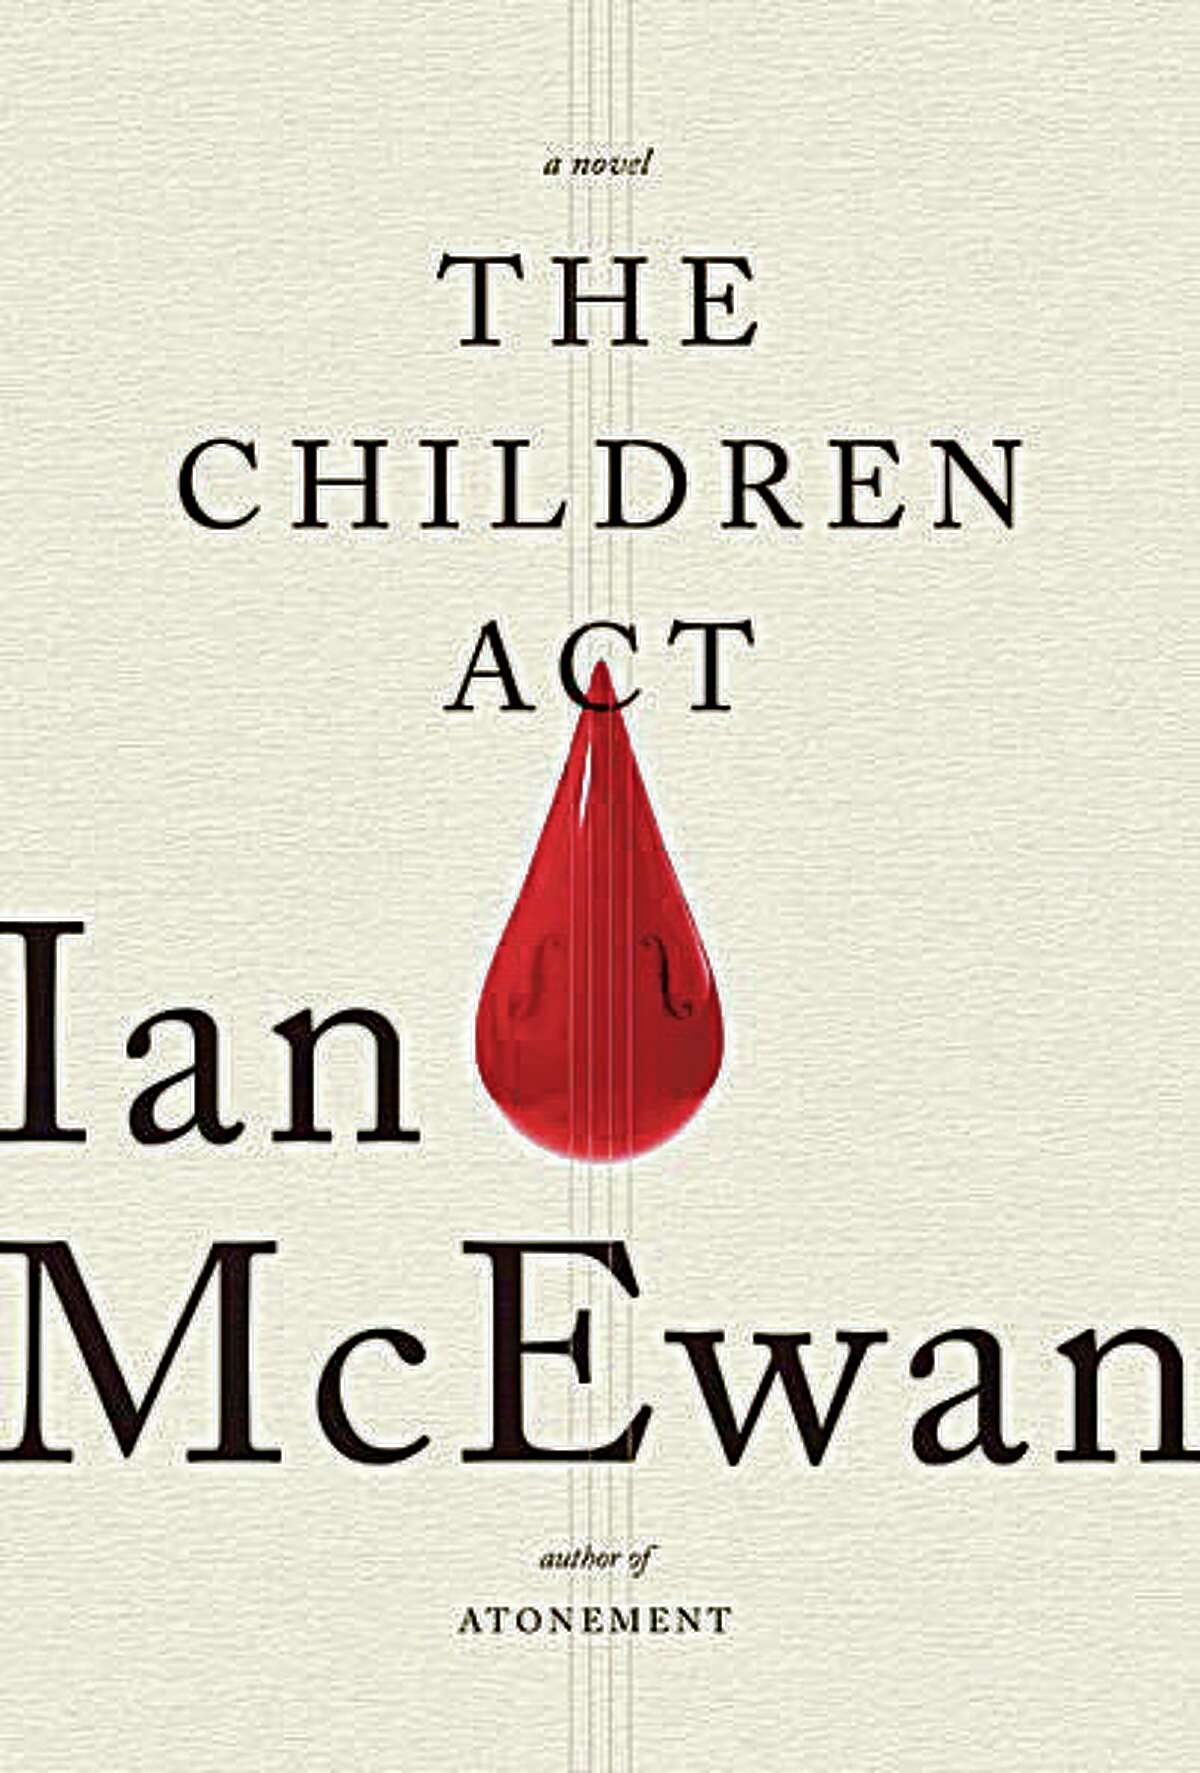 "The Children Act" by Ian McEwan. From the author of "Atonement," a slim novel about a high-court judge with marriage troubles who must determine the fate of a sensitive teenage boy. McEwan explores the limits of the law and the expansiveness of humanity, as well as the chasms between youth and age, and organized religion and free thought. (Nan A. Talese/Doubleday)